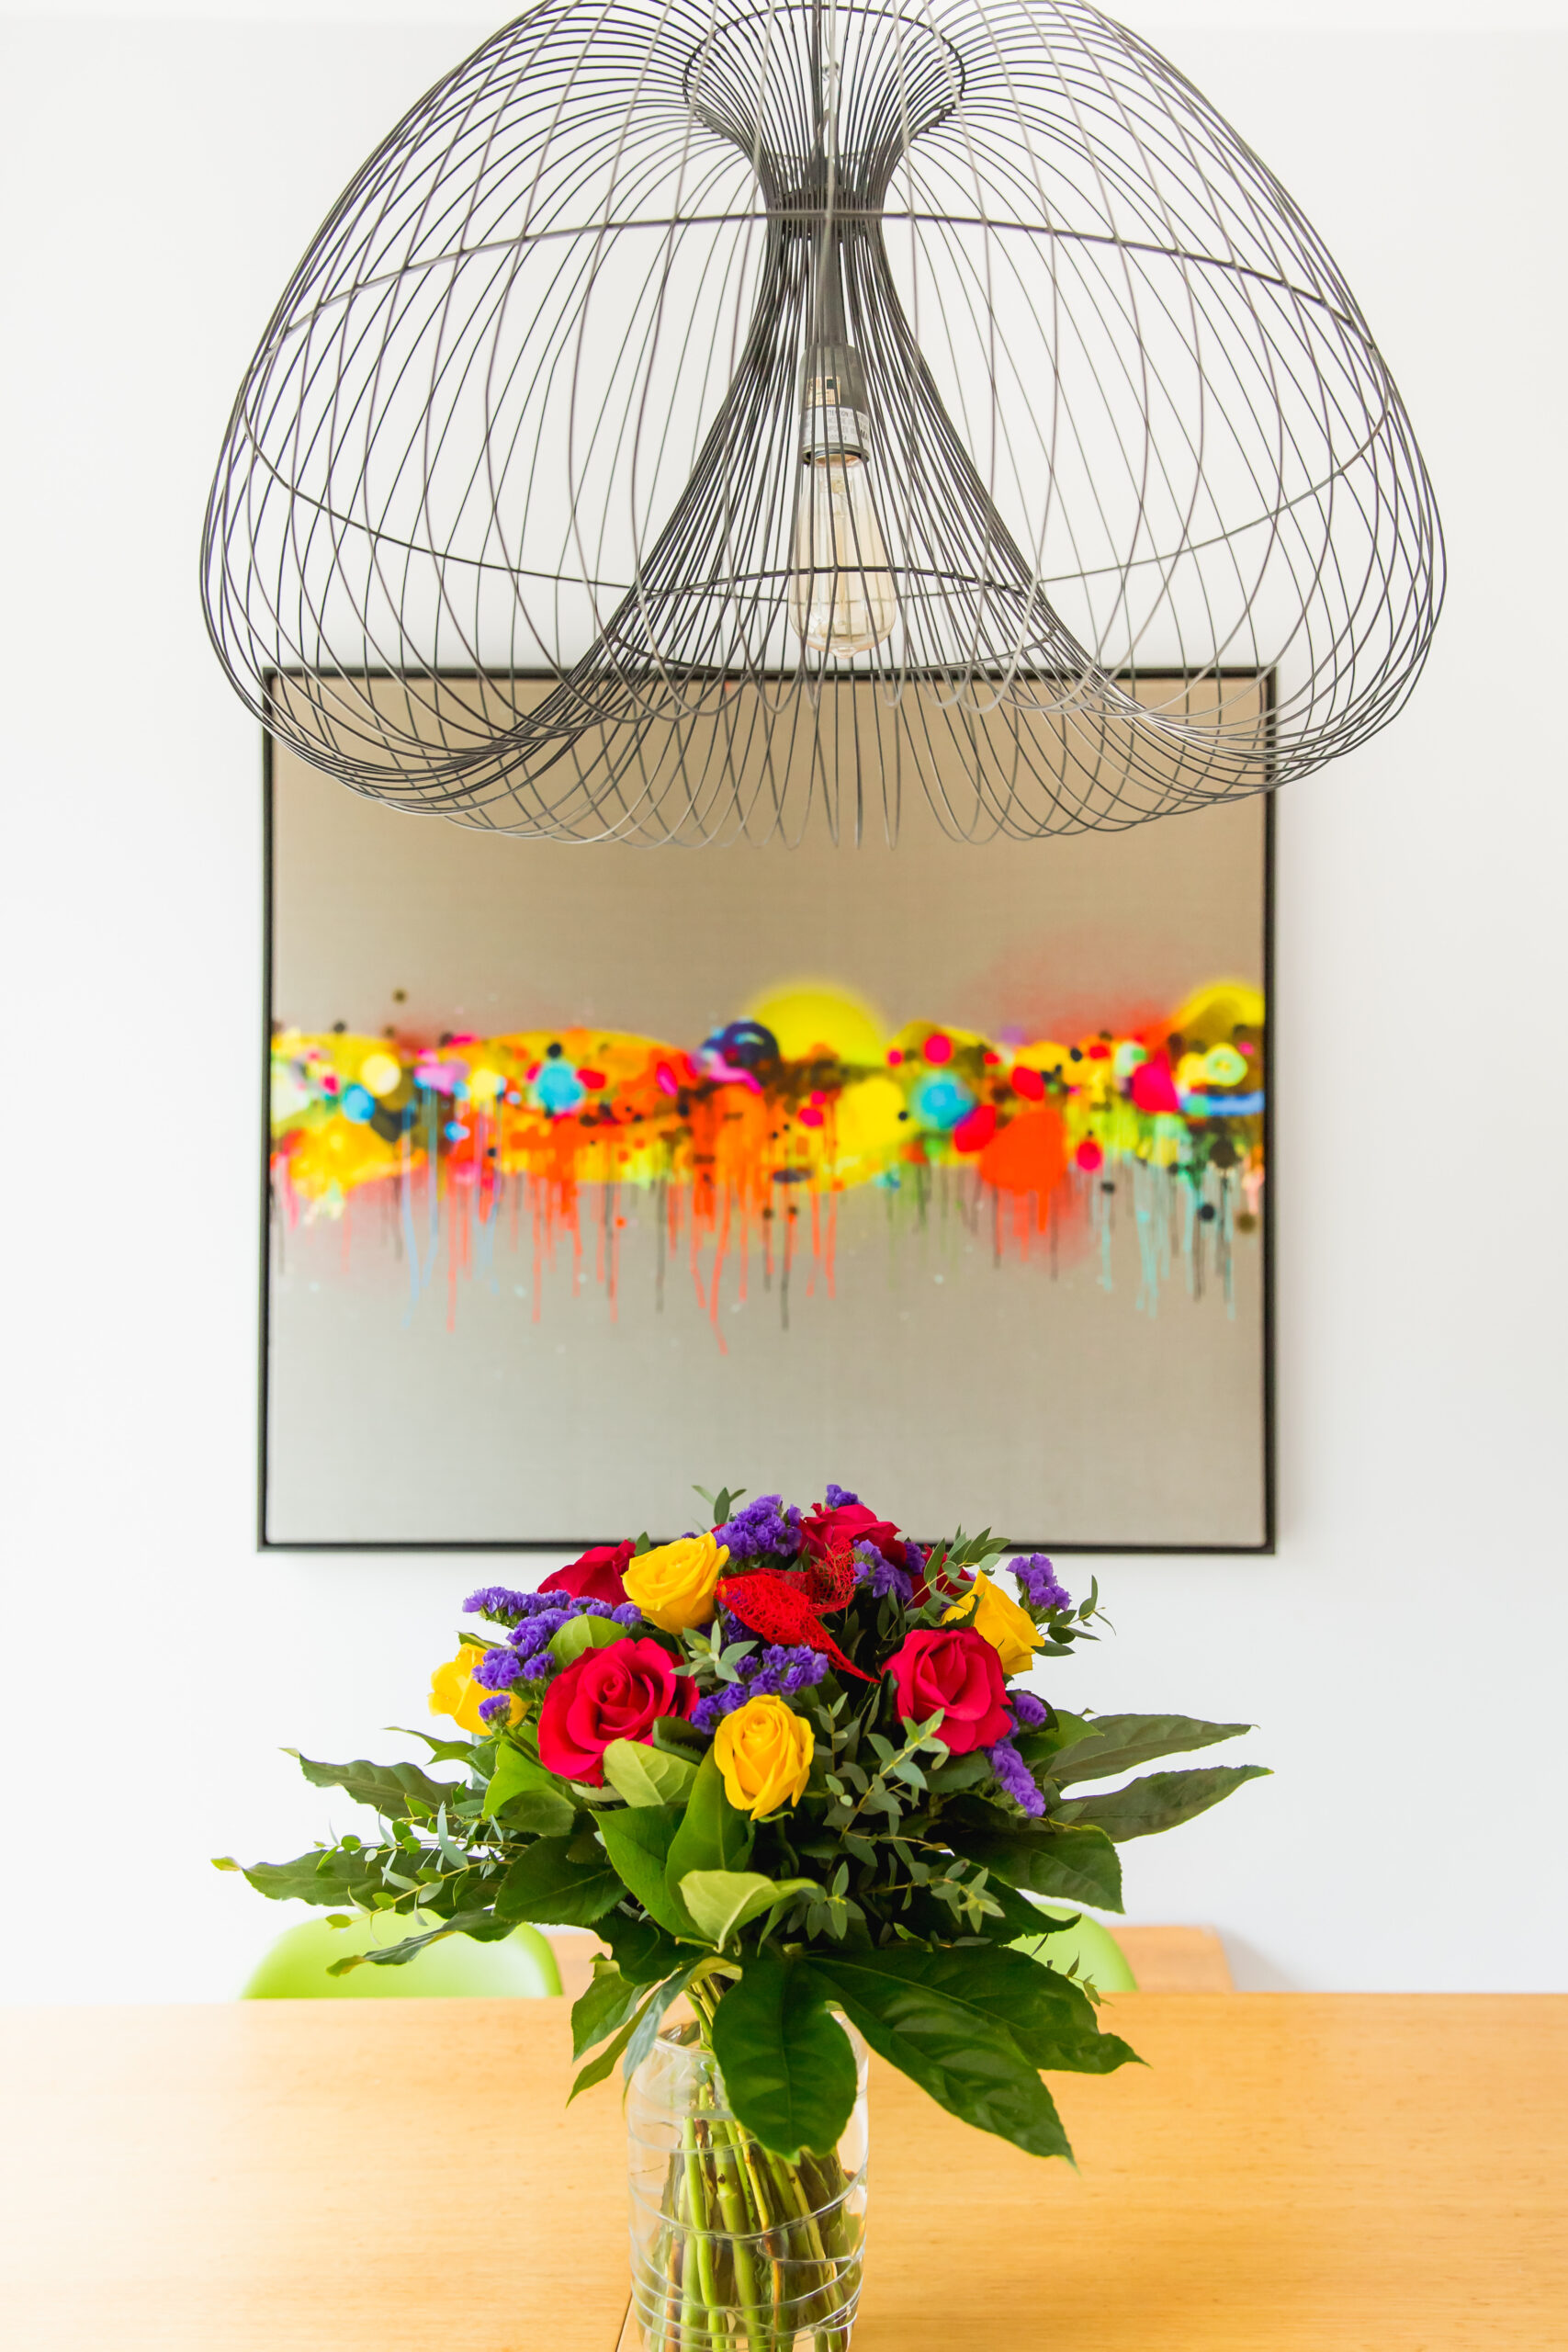 light fitting, table with flowers and wall art